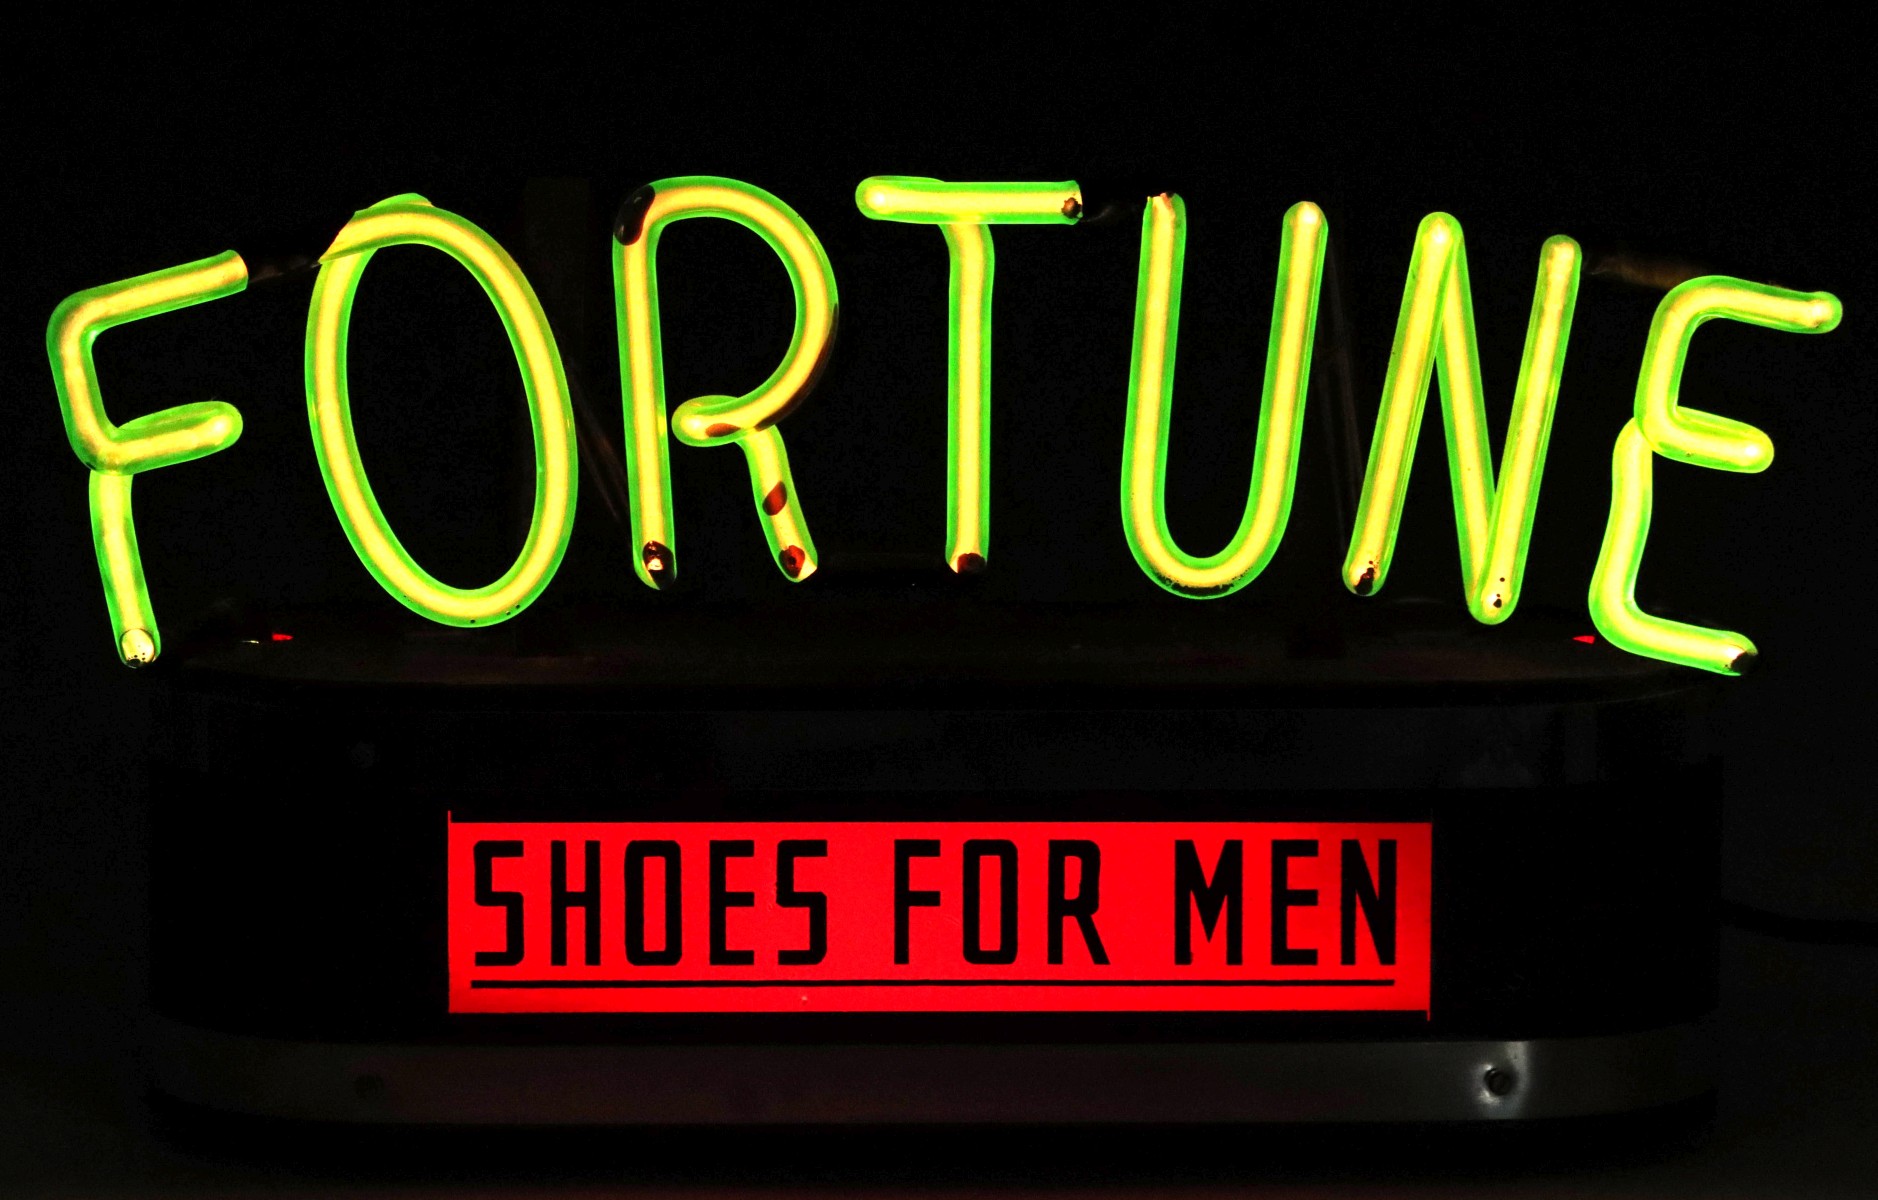 'FORTUNE SHOES FOR MEN' 1930s NEON WITH CRINKLE FINISH